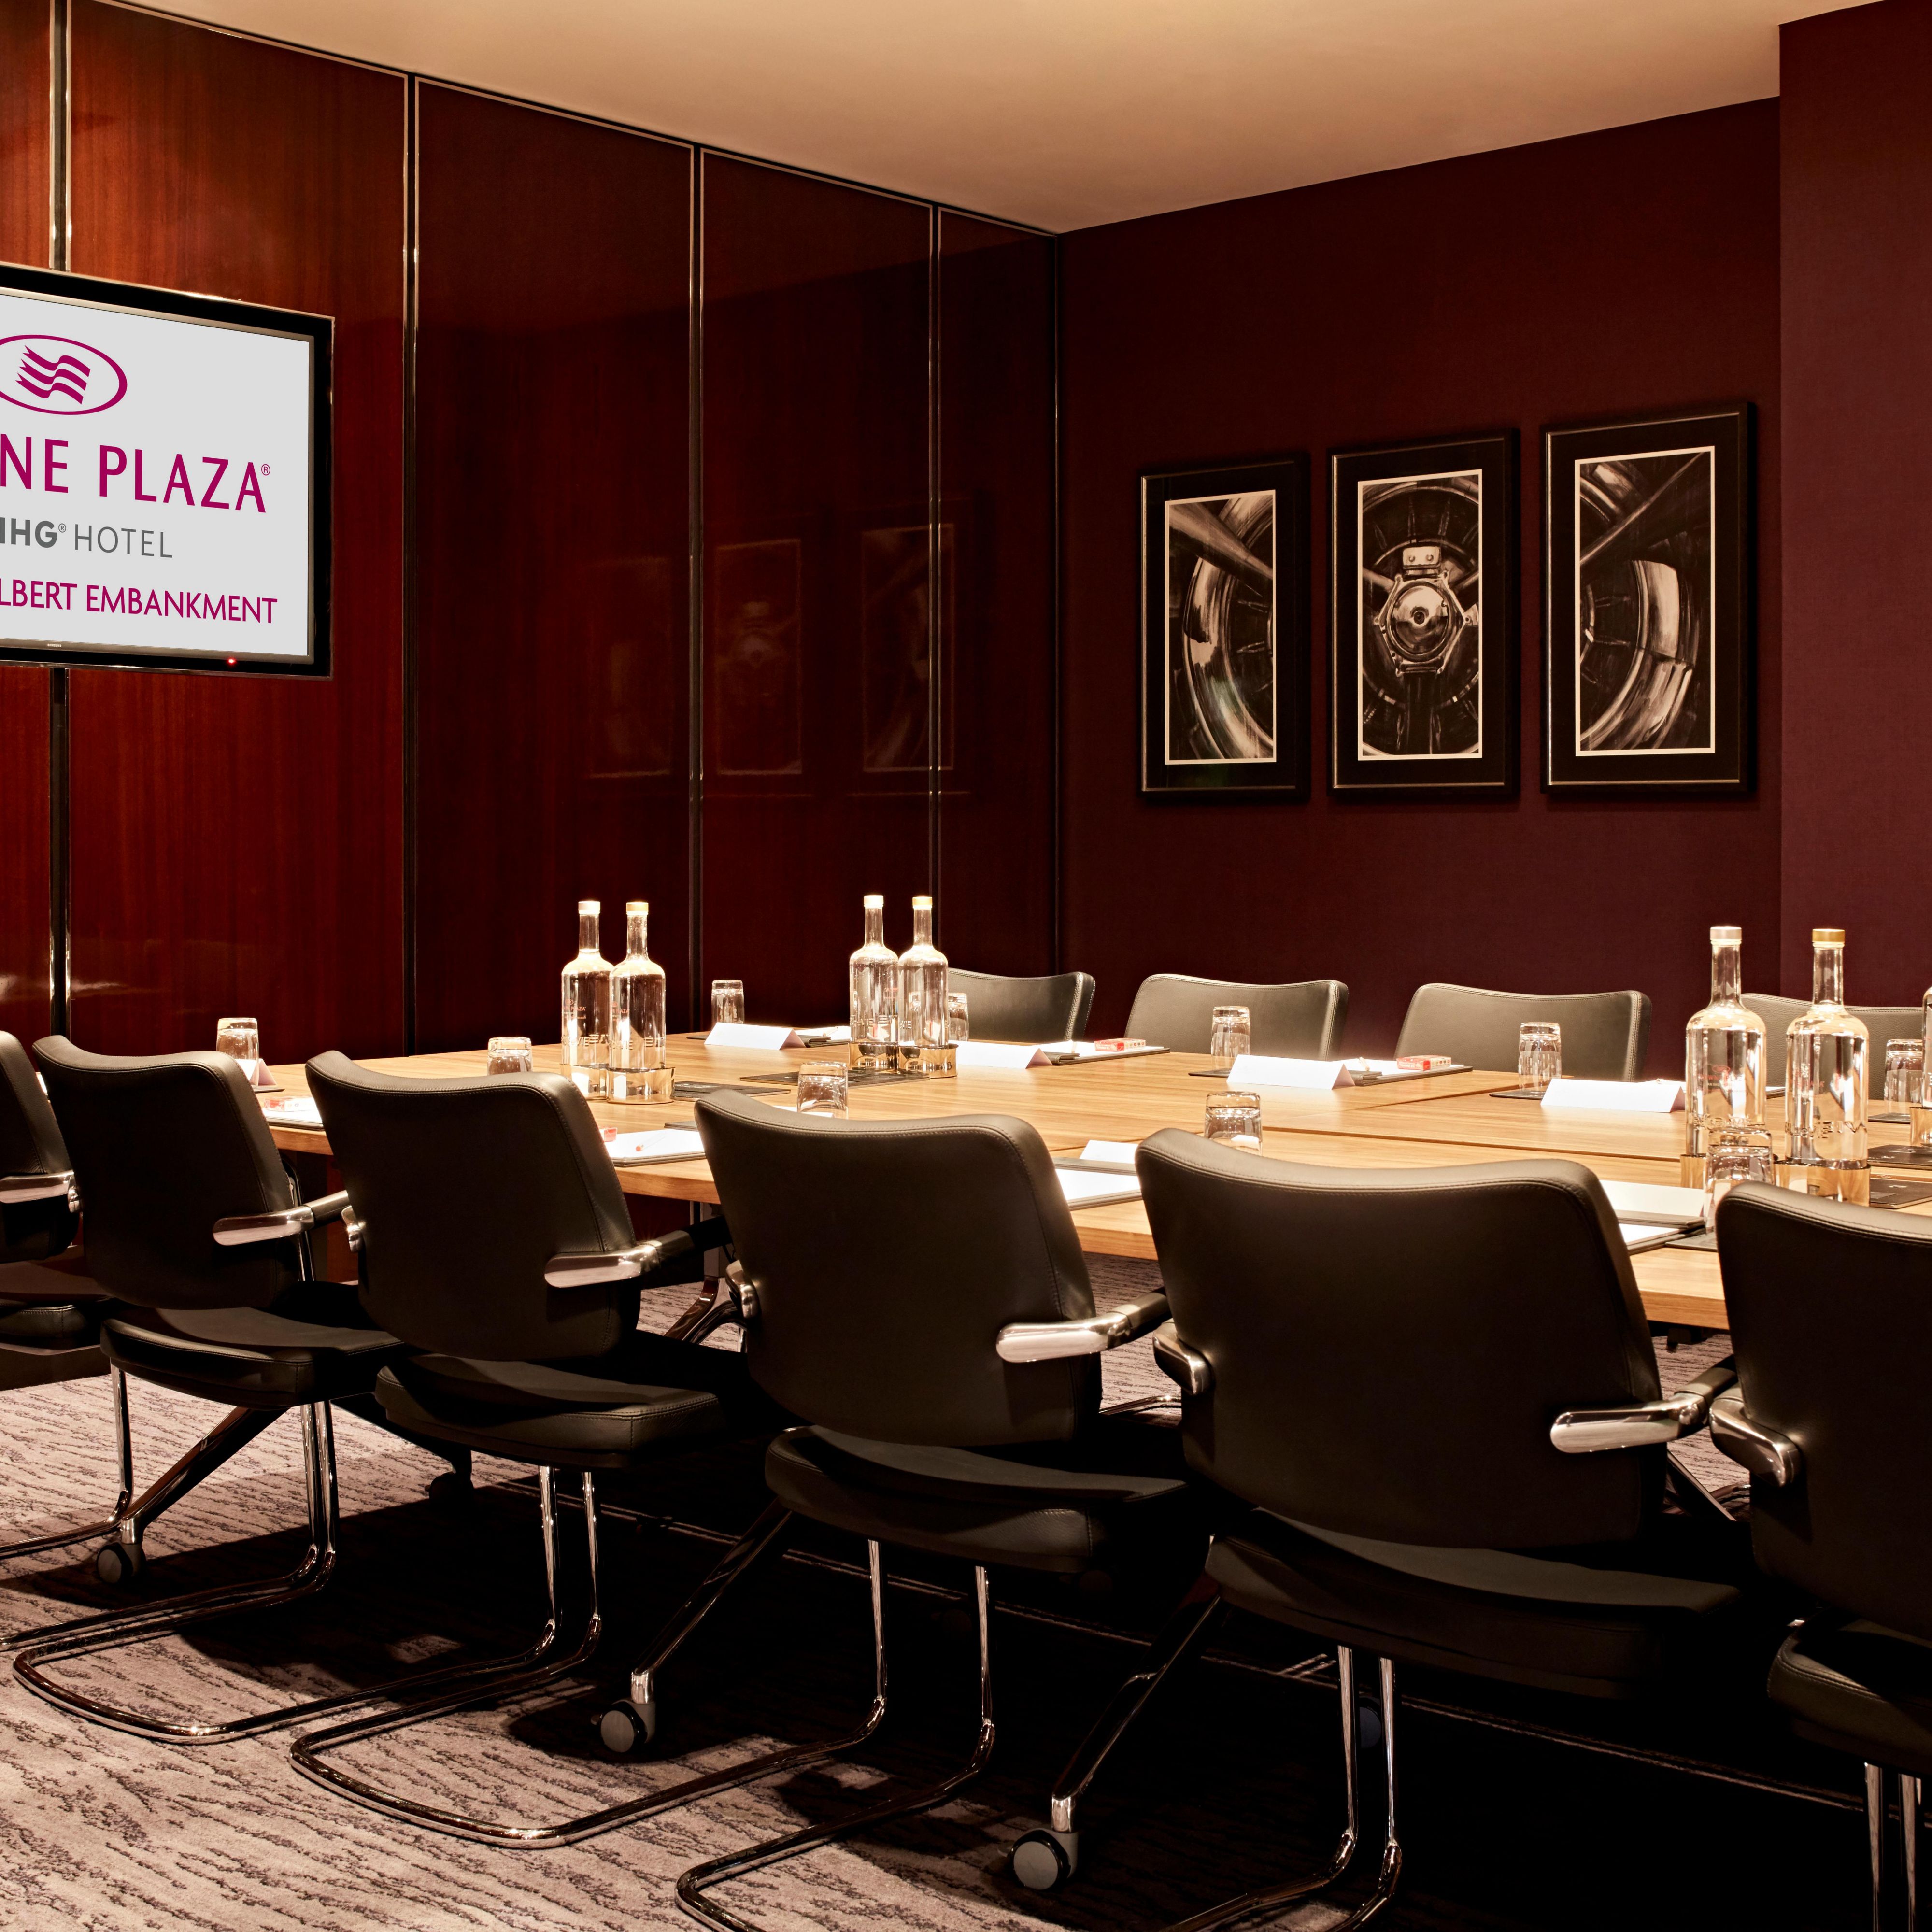 Meeting Room 1 is perfect for private meetings